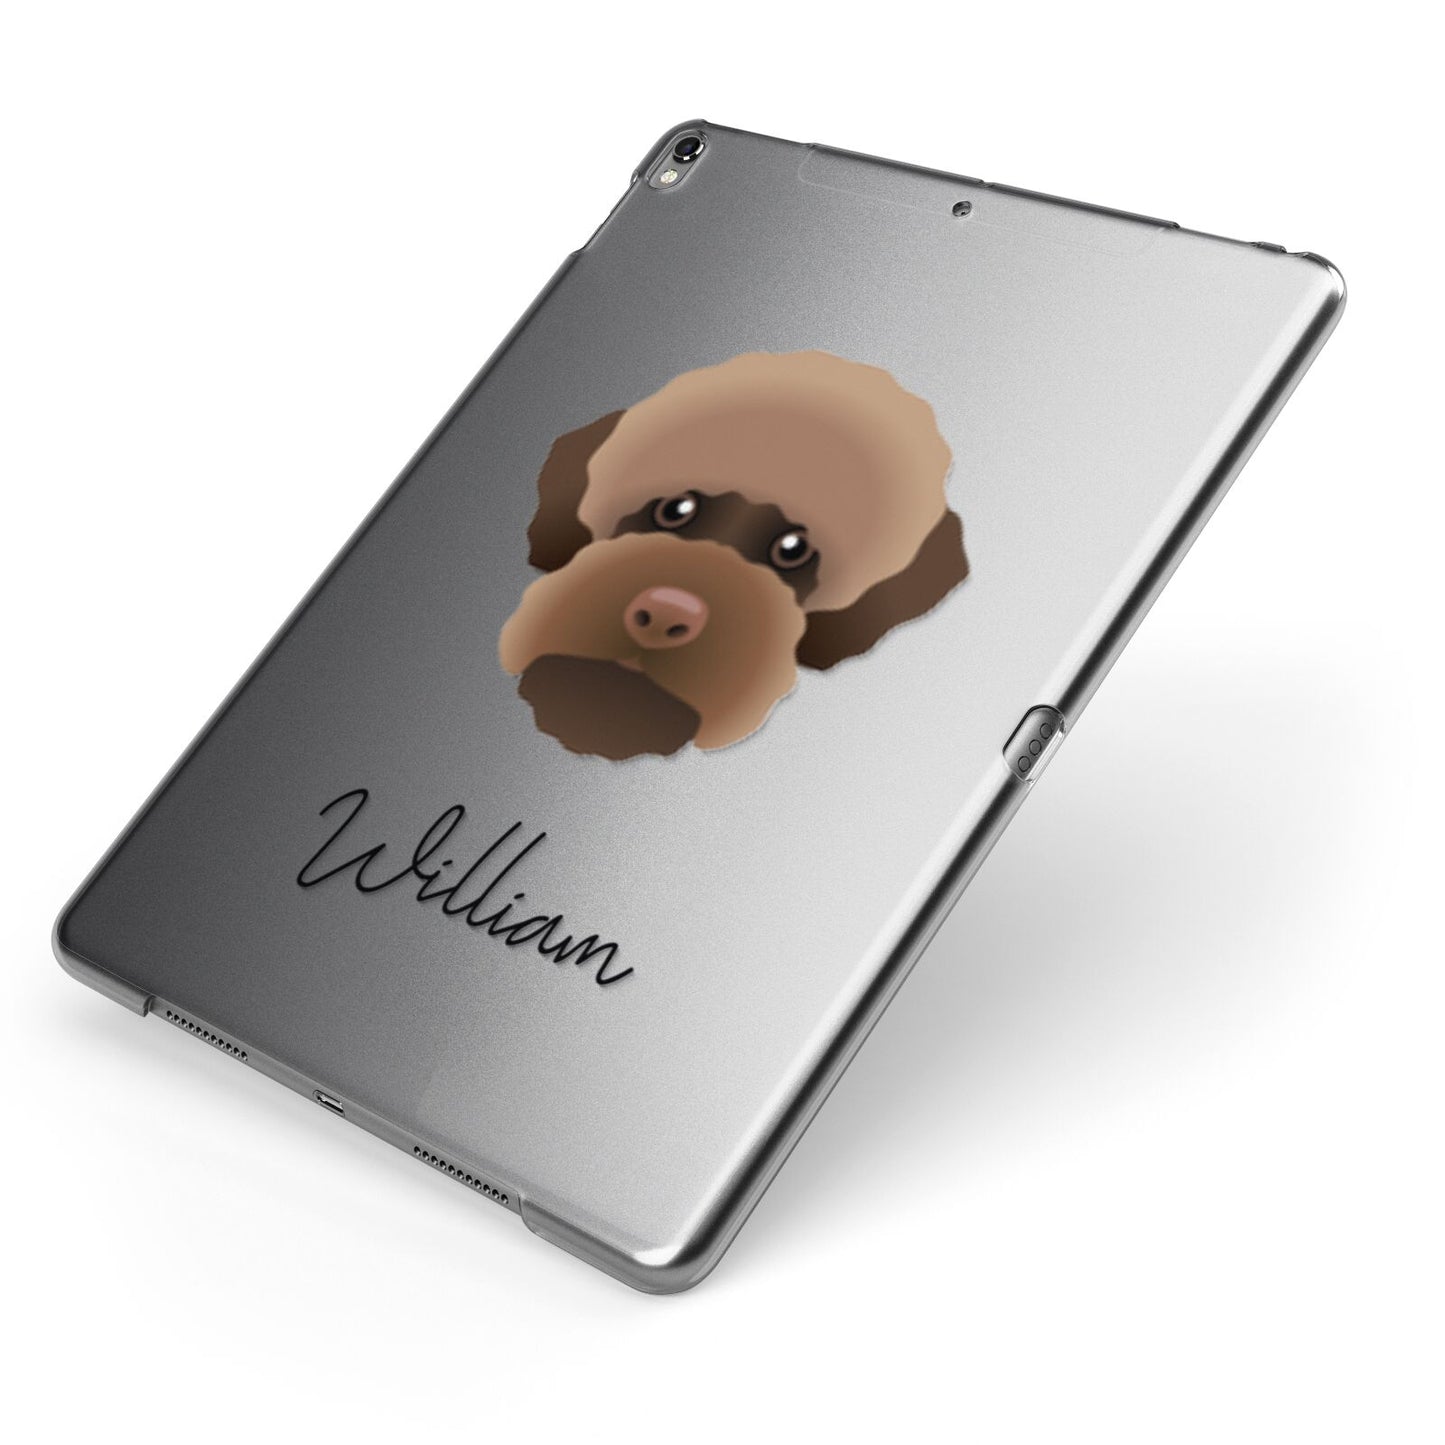 Lagotto Romagnolo Personalised Apple iPad Case on Grey iPad Side View